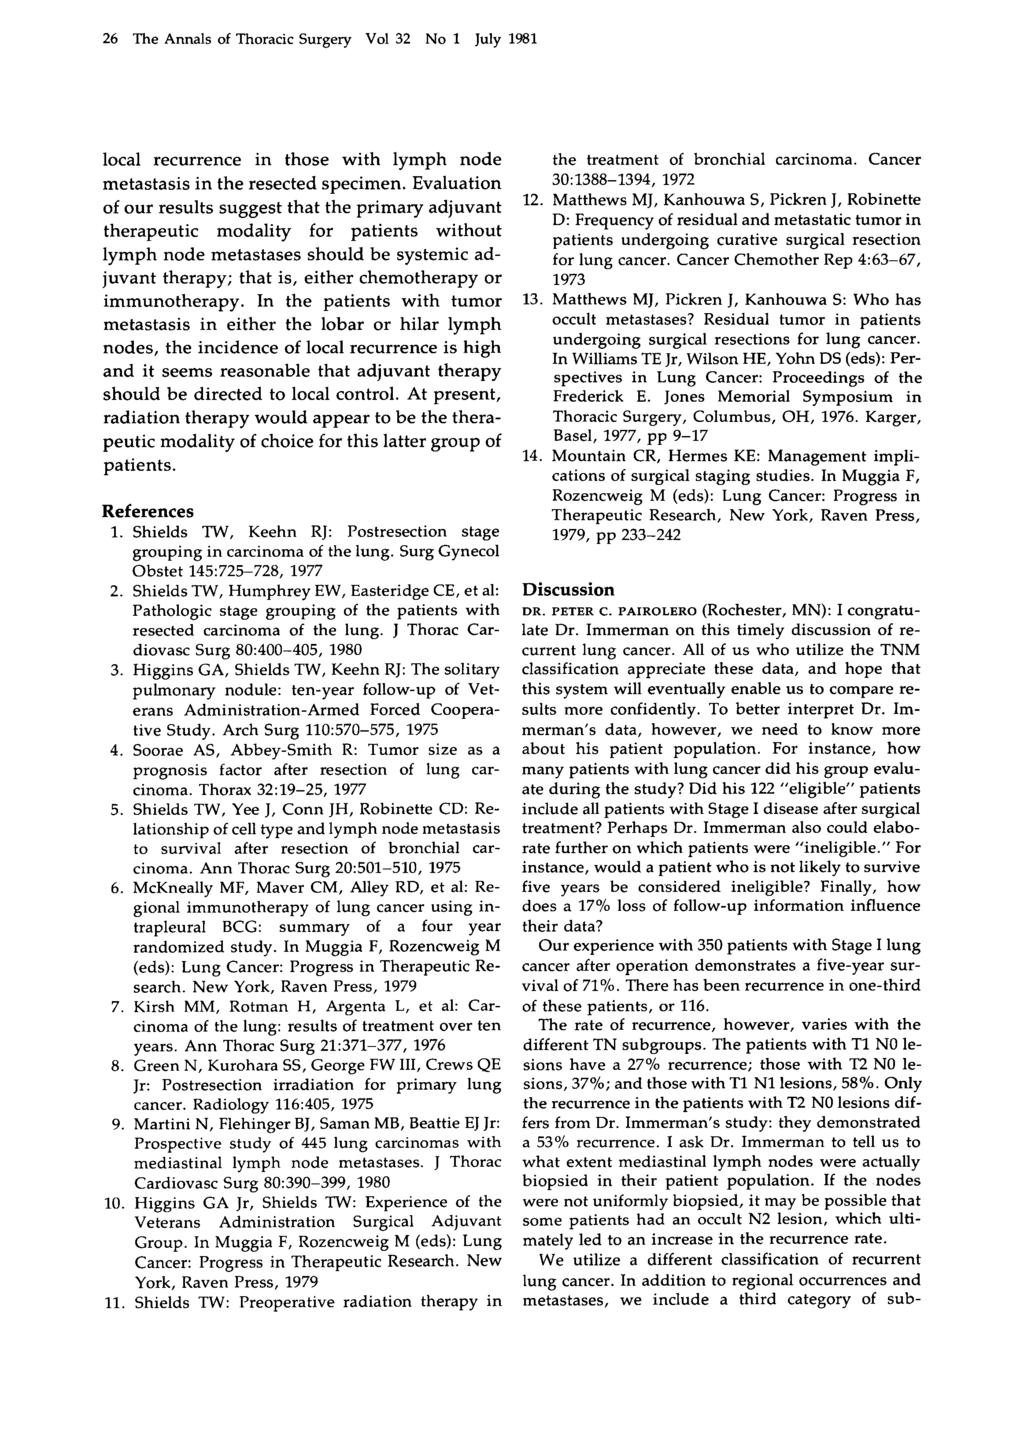 26 The Annals of Thoracic Surgery Vol 32 No 1 July 1981 local recurrence in those with lymph node metastasis in the resected specimen.